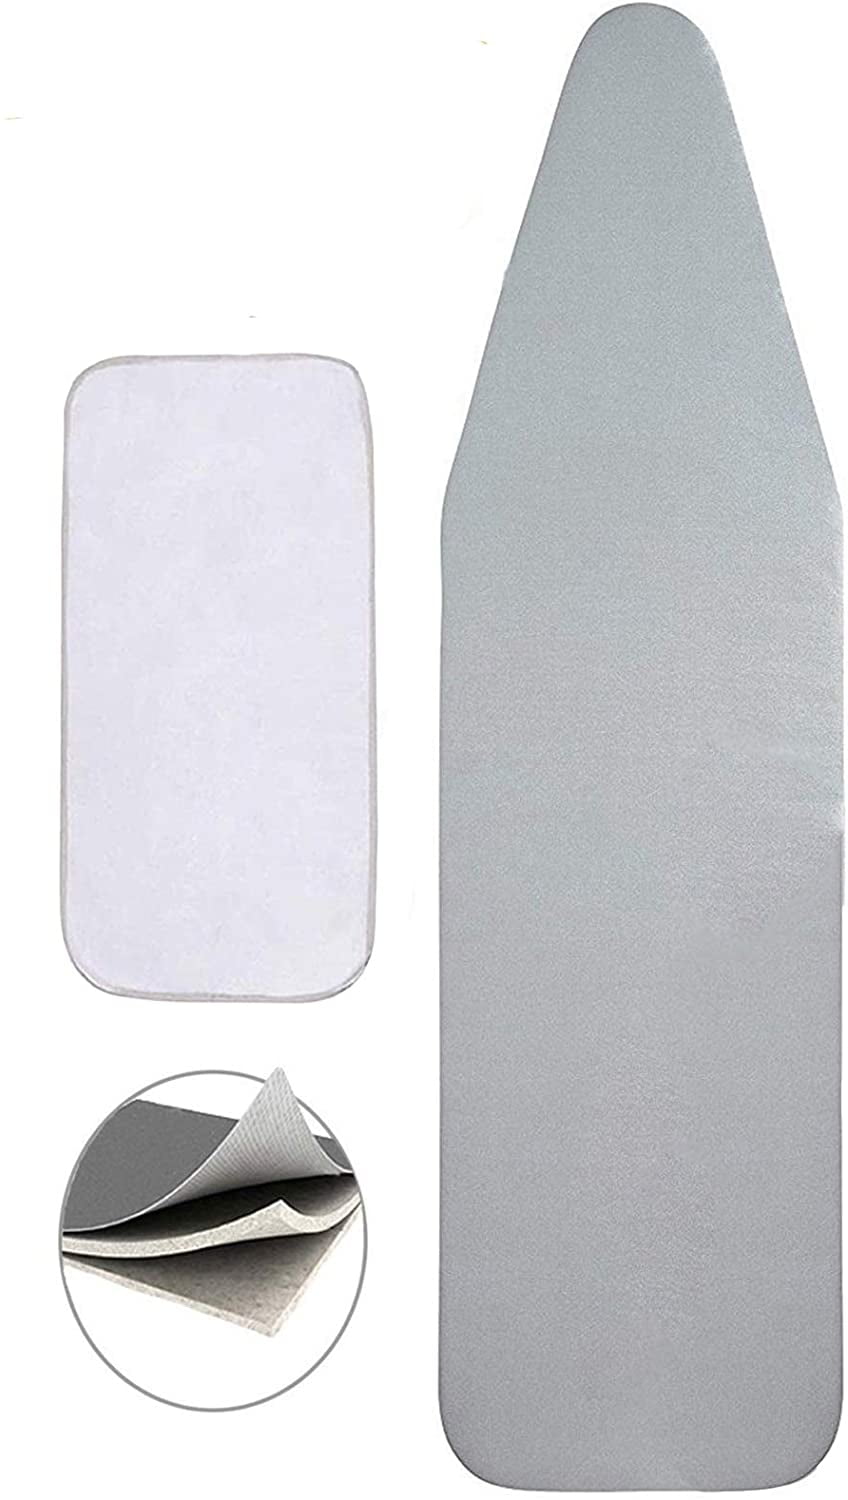 EXTRA WIDE IRONING BOARD Cover & Pad 18 x 48-49 7347 ** FREE PRESSING PAD *** 